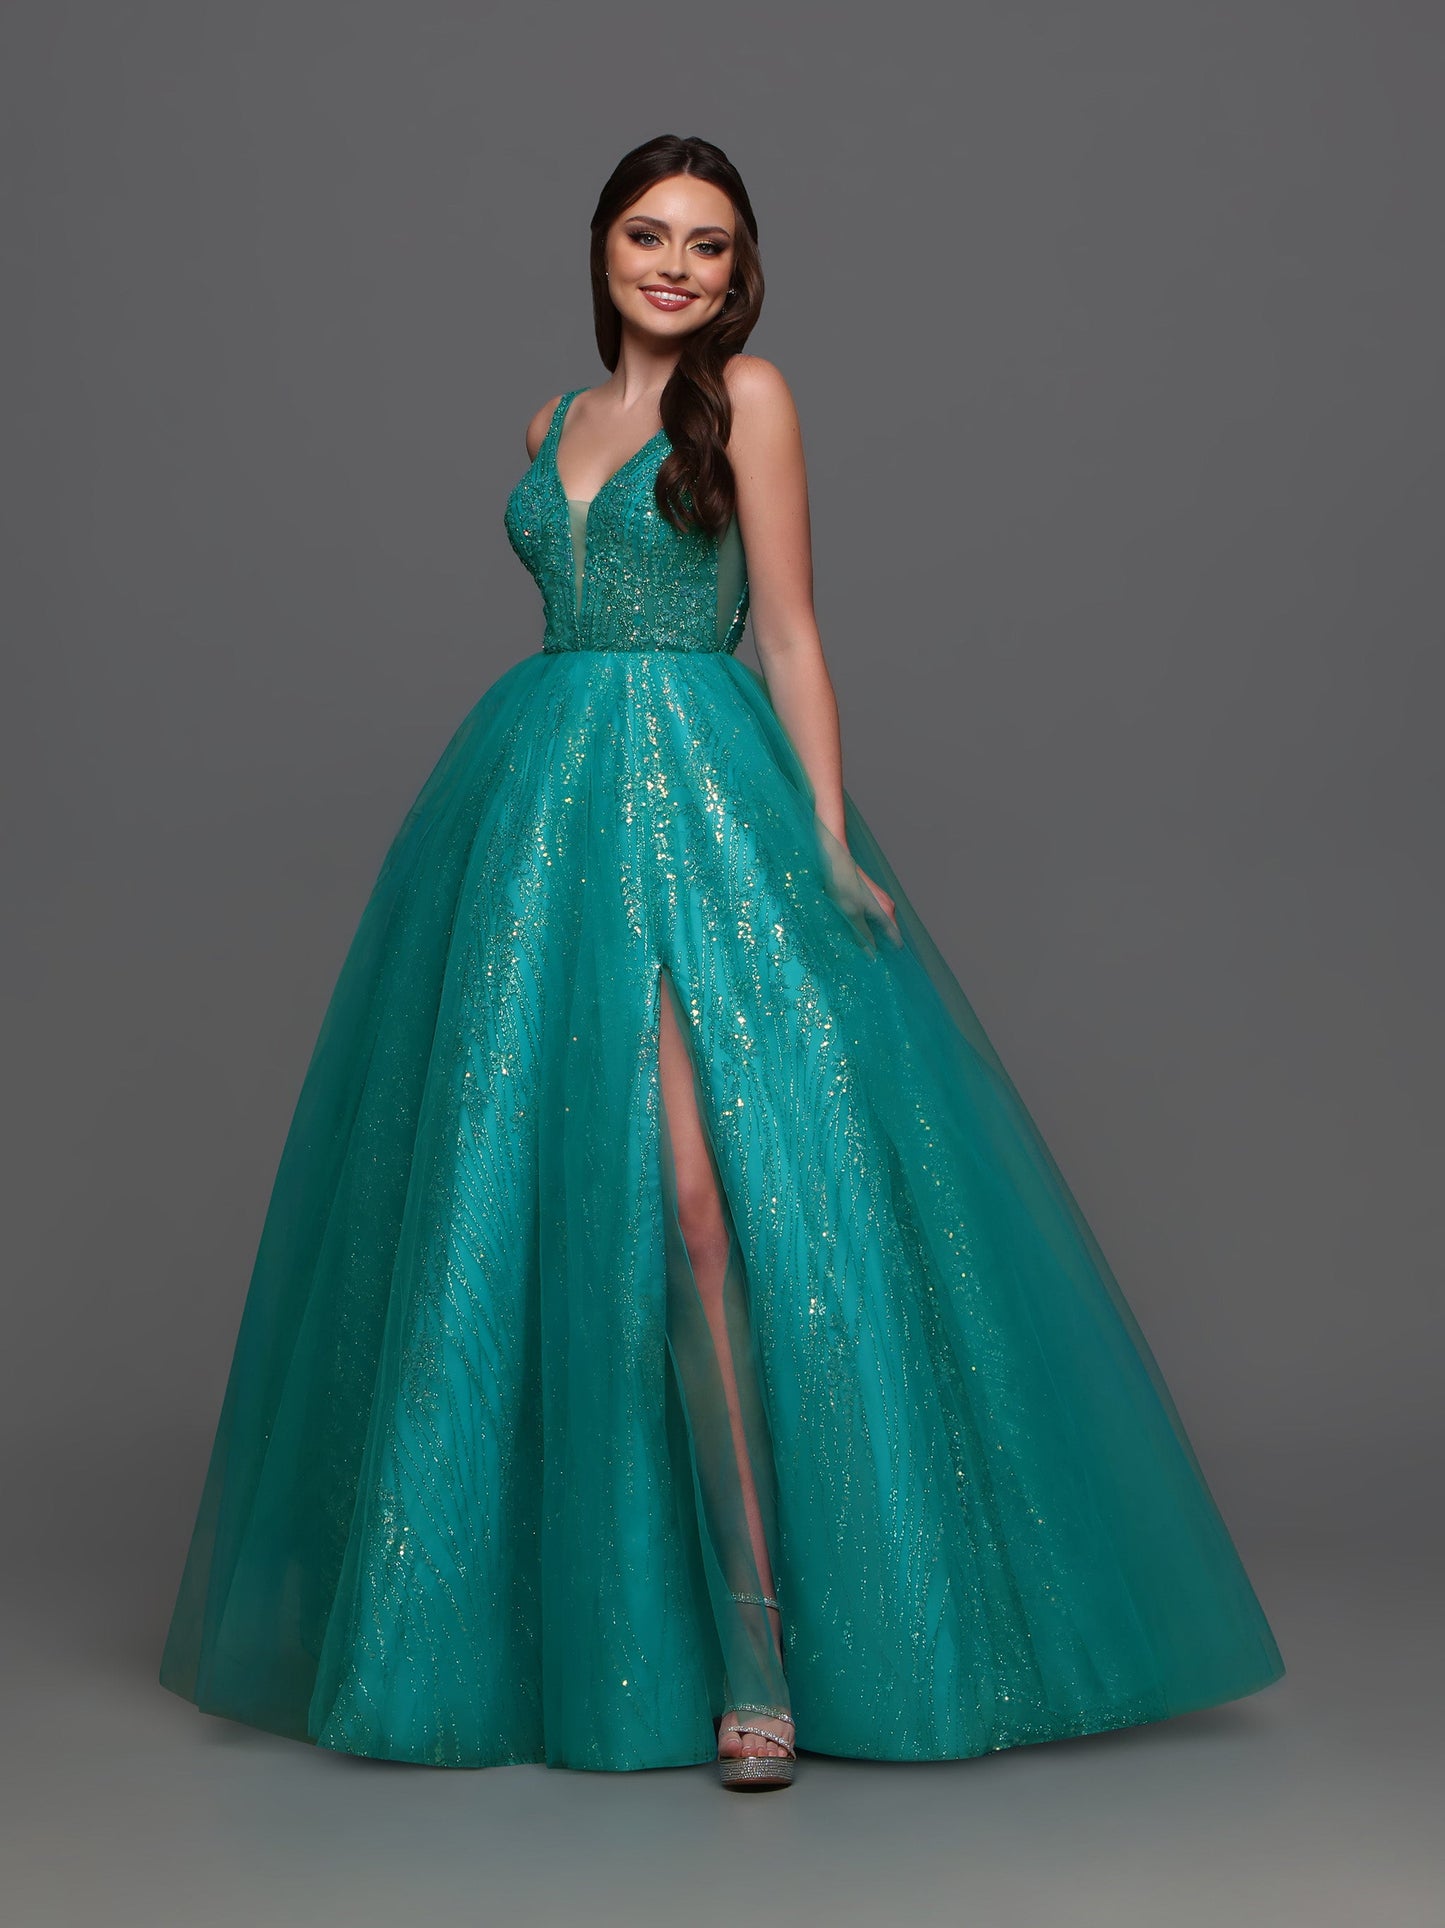 The Candice Wang 72336 Prom Dress is both chic and glamorous! Featuring a sheer glitter A-line design with a striking V-neckline and a stylish slit, this dress adds a touch of shimmer to your formal event. Perfect for making a statement and standing out in the crowd.  Sizes: 0-20  Colors: Lavender, Teal